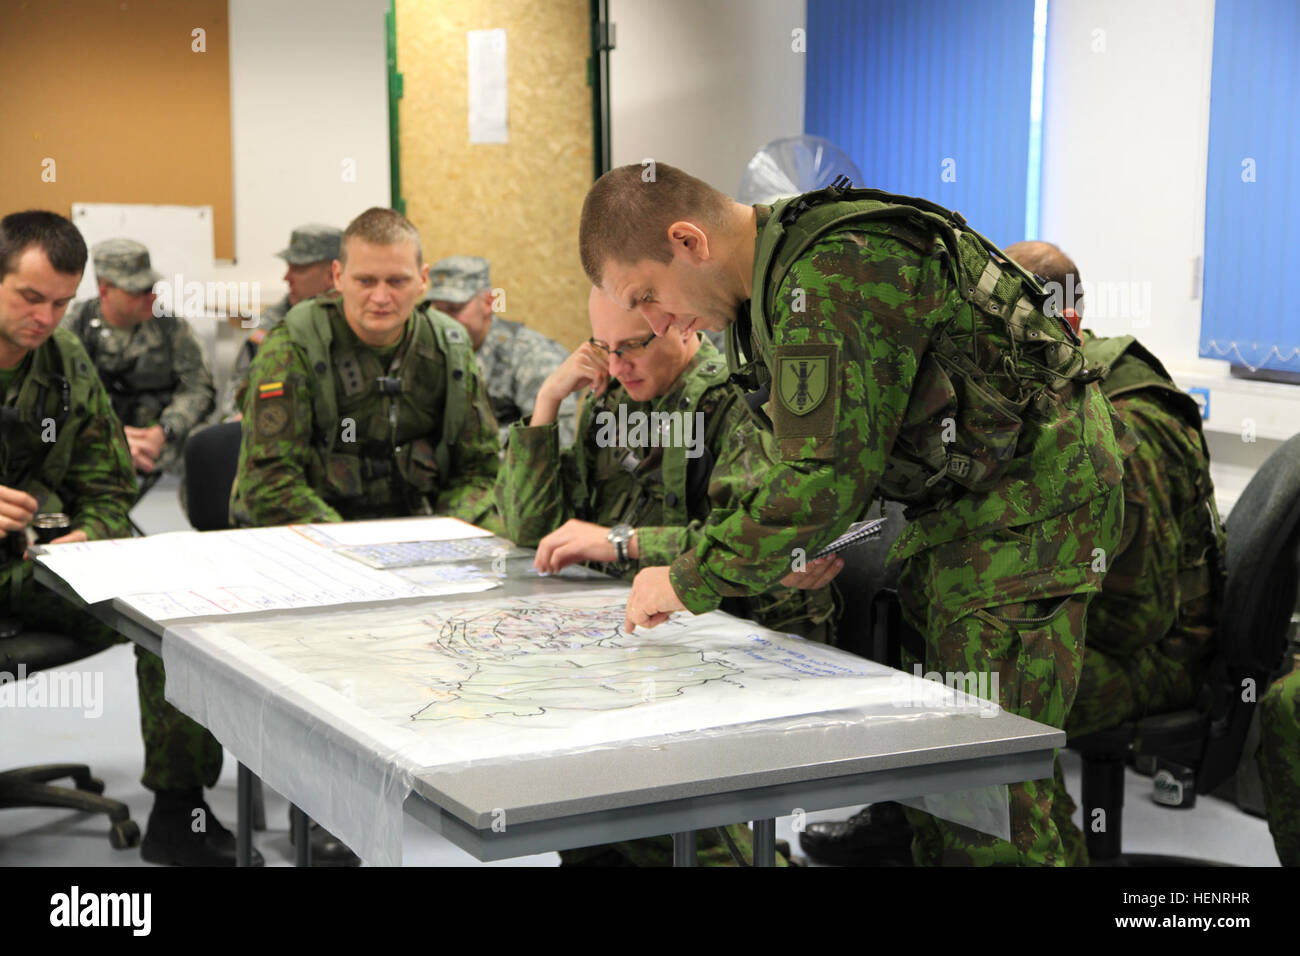 A Lithuanian soldier of 'Iron Wolf' Mechanized Infantry Brigade references a map while working to plan a mission during training exercise Saber Junction 2014 at the Joint Multinational Readiness Center in Hohenfels, Germany, Sept. 6, 2014. Saber Junction 2014 prepares U.S., NATO allies and European security partners to conduct unified land operations through the simultaneous combination of offensive, defensive and stability operations appropriate to the mission and the environment.  More information about Saber Junction 2014 can be found at http://www.eur.army.mil/SaberJunction/ (U.S. Army pho Stock Photo